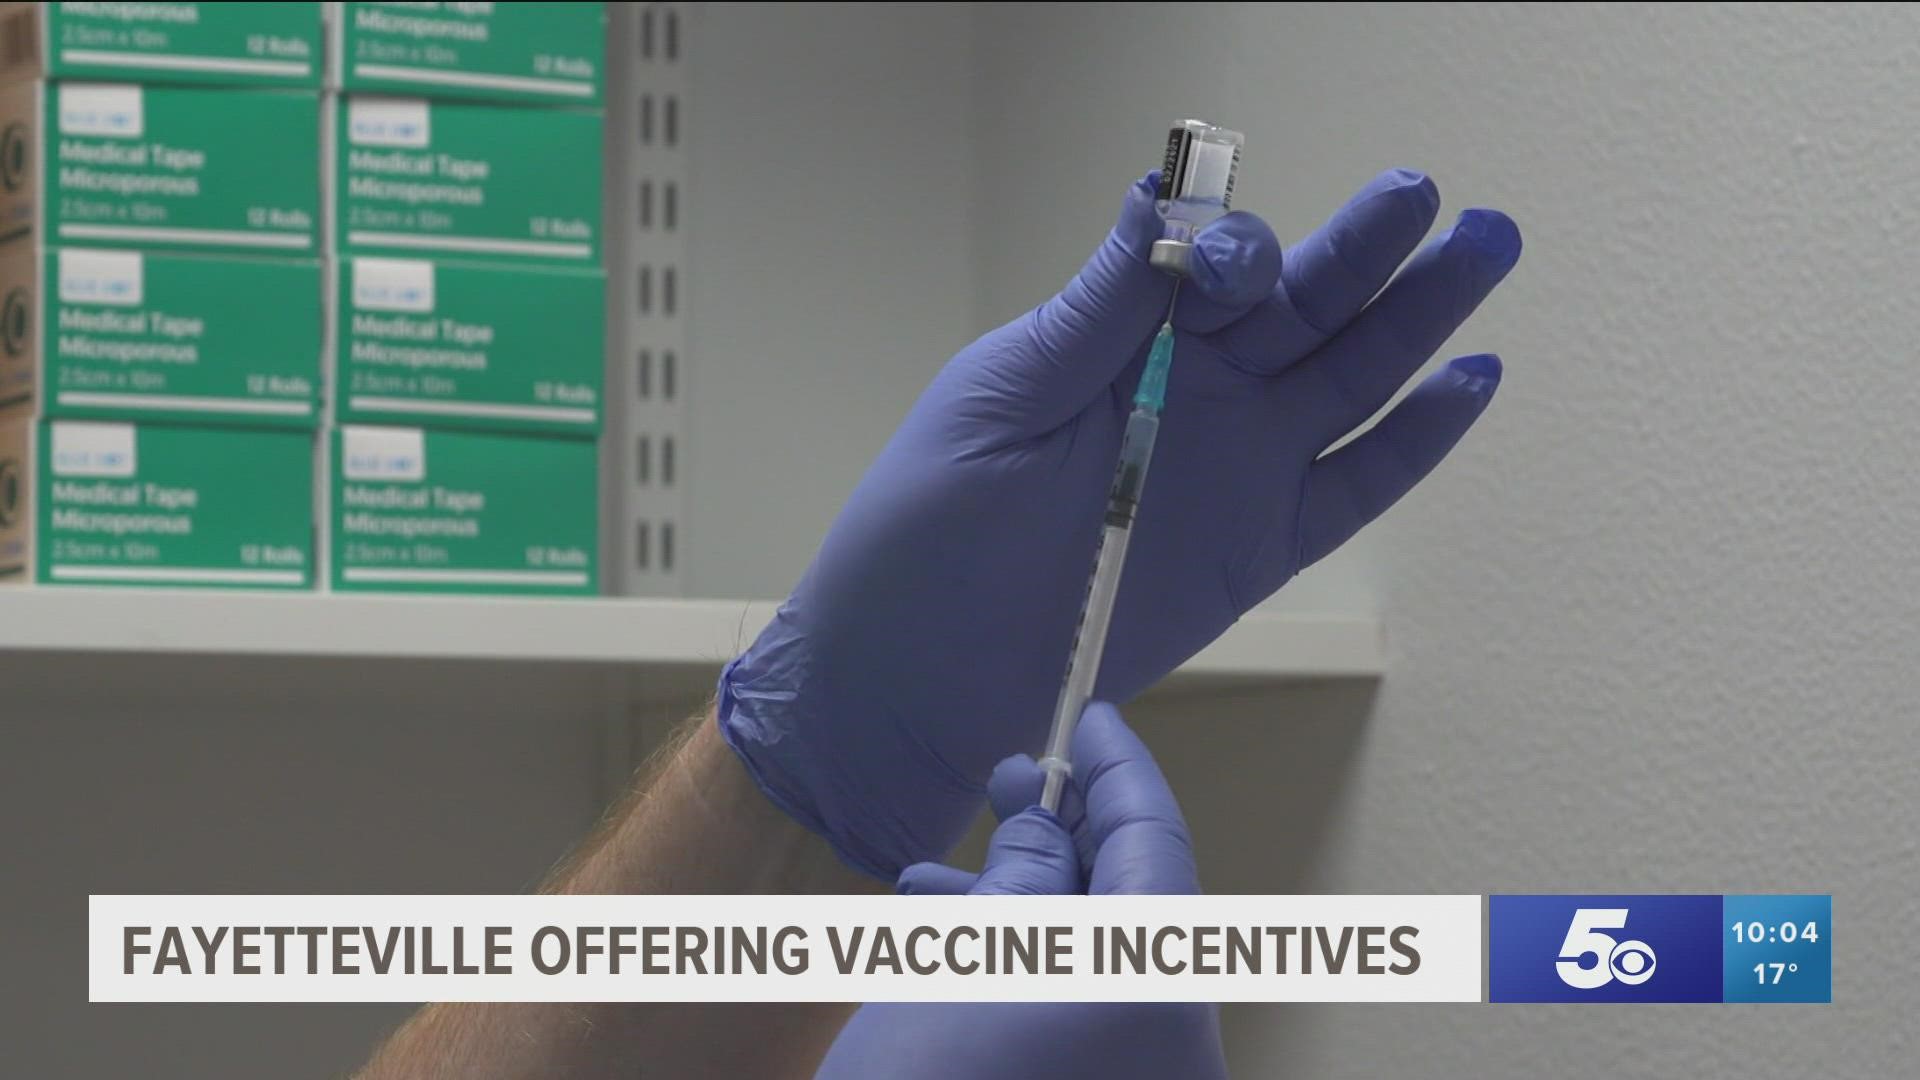 In an effort to get more residents vaccinated, the City of Fayetteville's Vaccine Incentive Program is offering residents $100 for proof of vaccination.